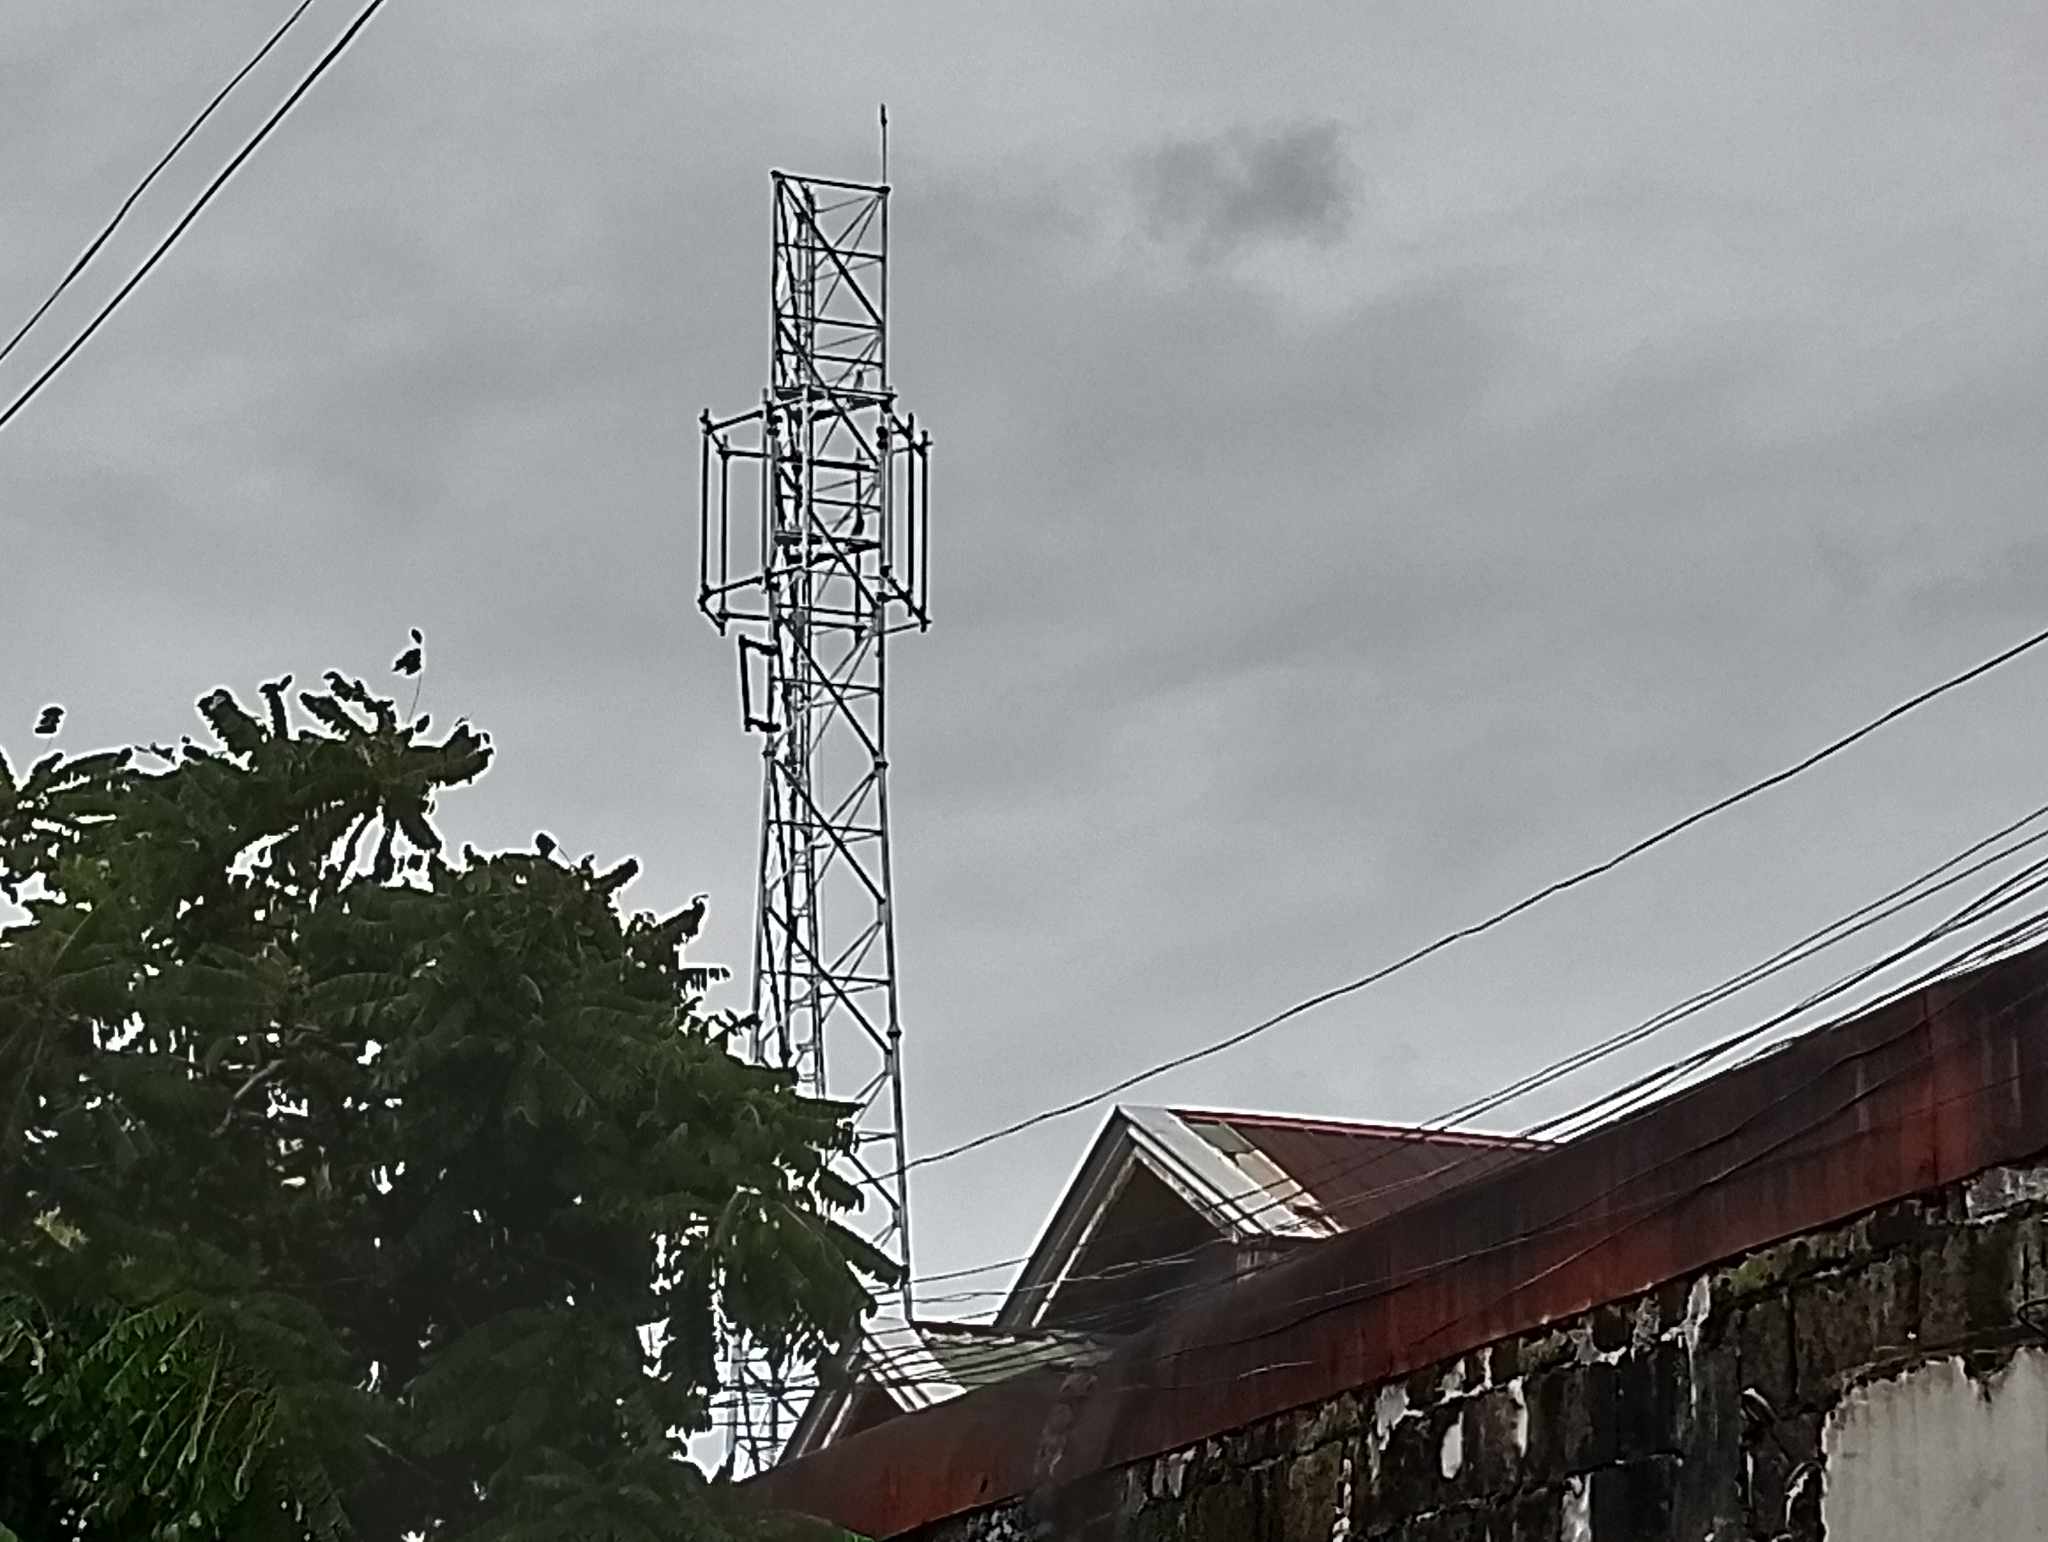 STOP! This photo taken by the OpinYon Laguna staff showed the under-construction cell site tower in Barangay San Roque, San Pedro City in Laguna. Some residents and local officials have called on the city government to halt the construction of the tower, citing potential health and safety risks to nearby residents. Photo by the Opinyon News Team